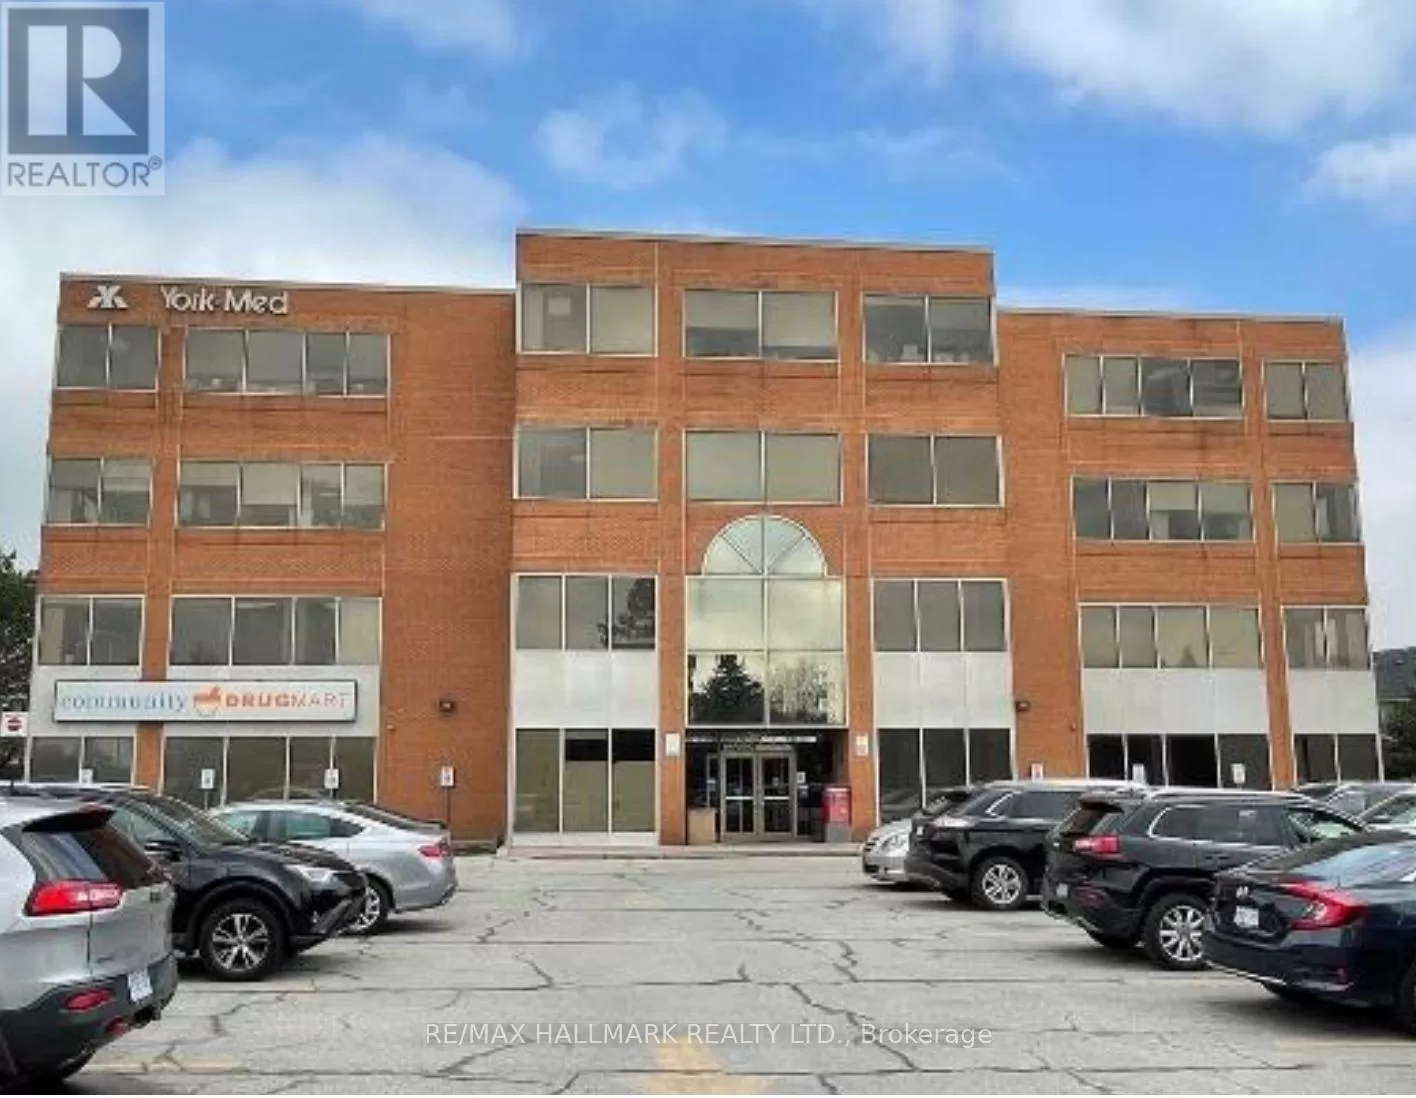 Offices for rent: 206 - 250 Harding Boulevard W, Richmond Hill, Ontario L4C 9M7